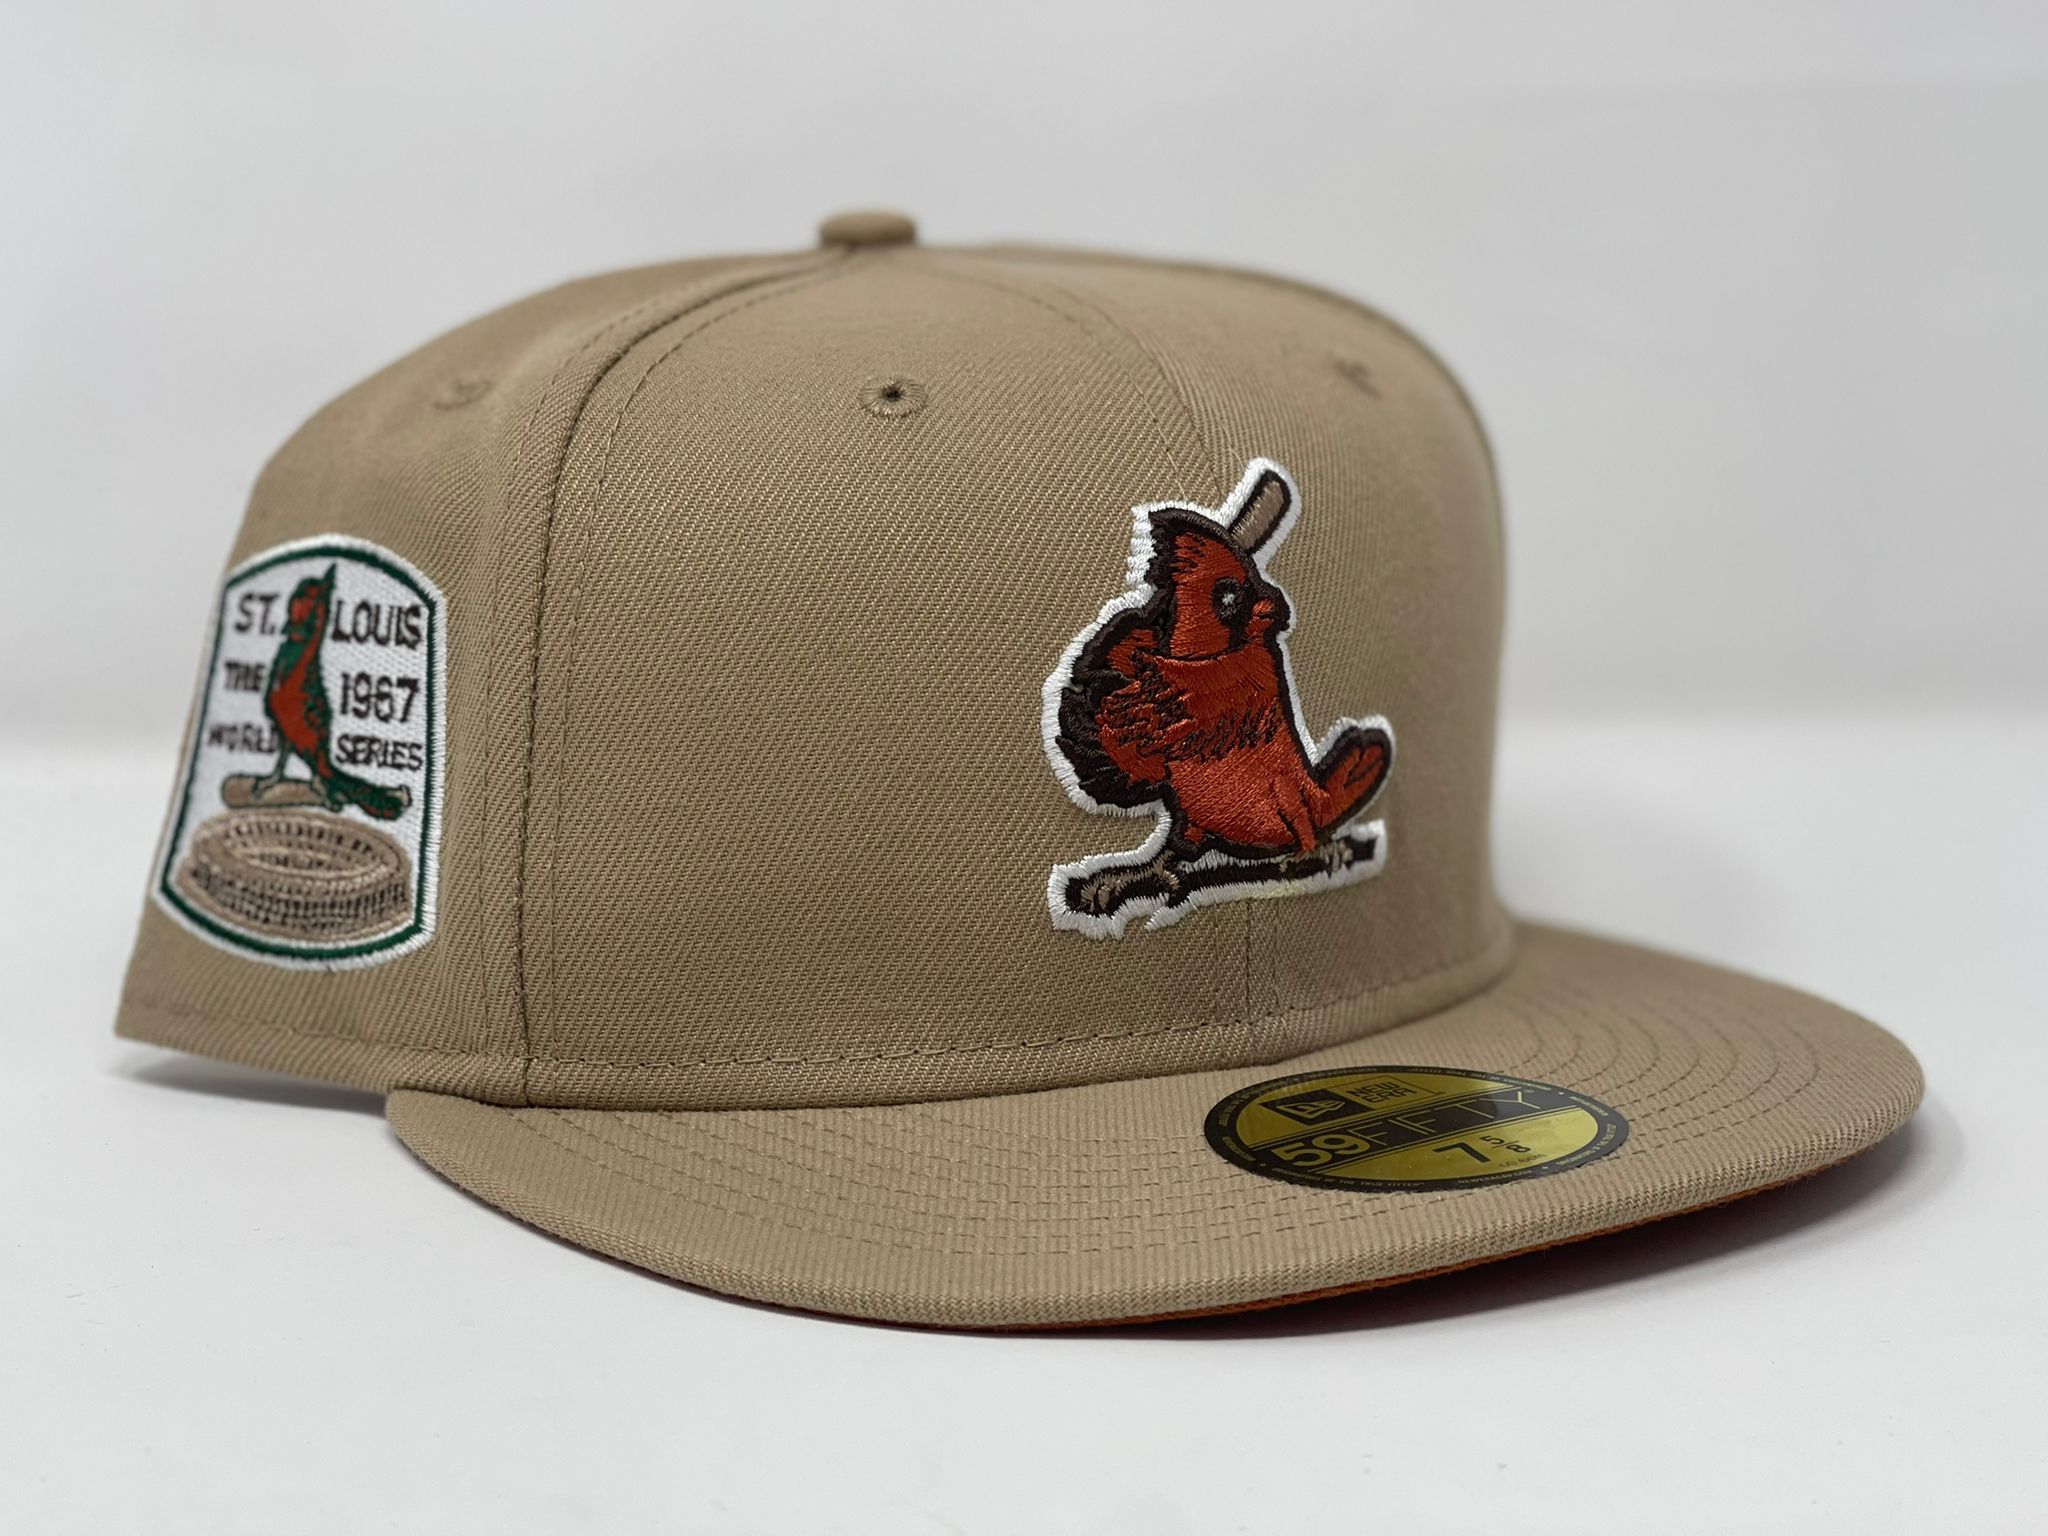 70699248] St. Louis Cardinals 67 WS Tan 59FIFTY Men's Fitted Hat